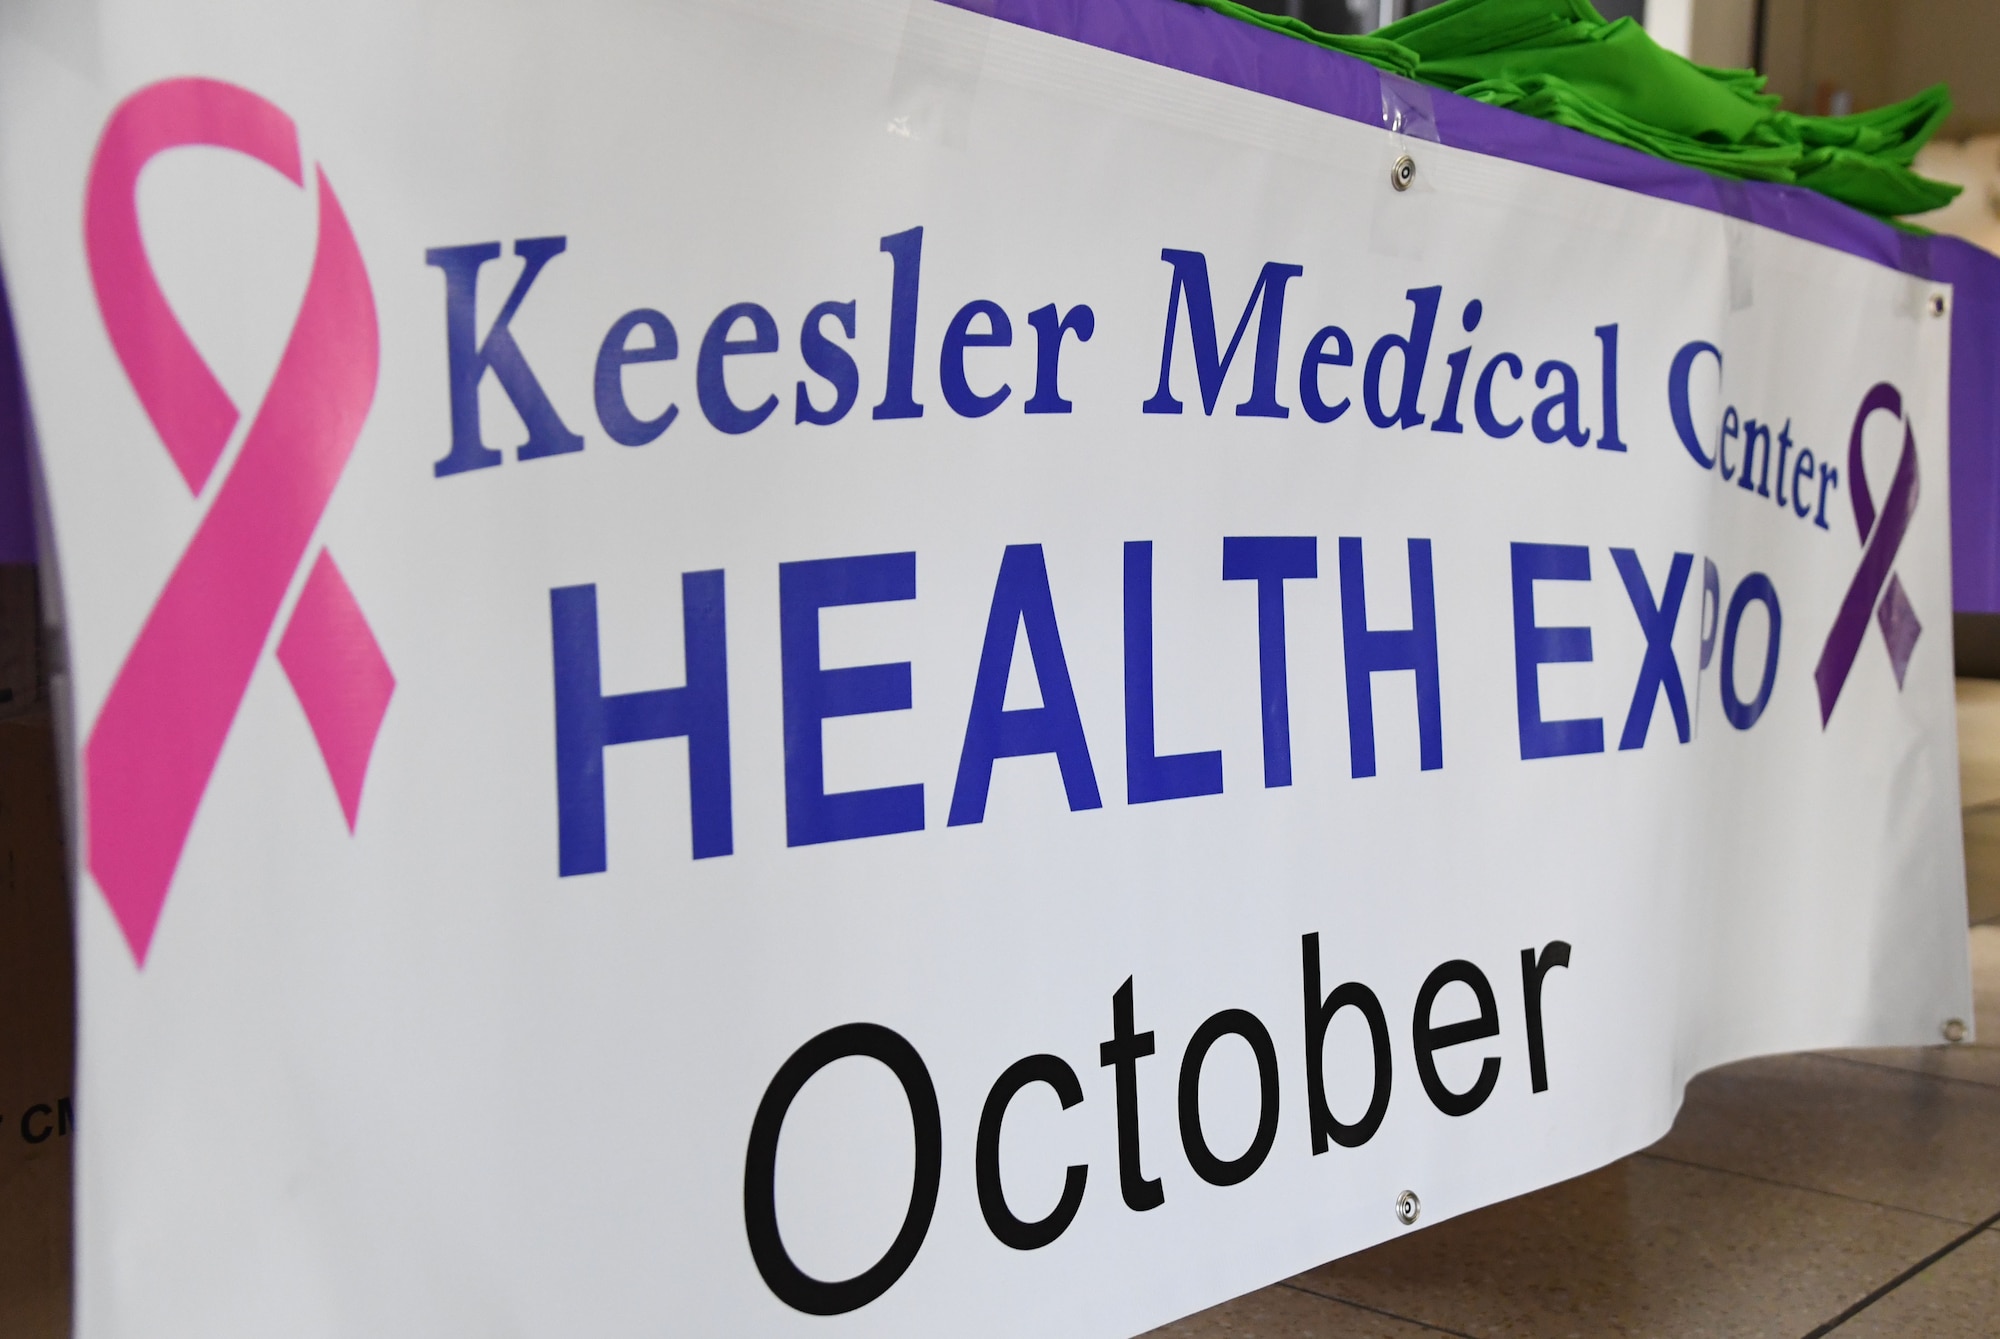 A banner is on display during the 11th Annual 81st Medical Group Health Expo inside the Keesler Medical Center auditorium at Keesler Air Force Base, Mississippi, October 7, 2022. The 81st MDG hosted the walk-in event, which included information booths and scheduling appointments for multiple types of cancer and chronic diseases in honor of Breast Cancer Awareness Month. (U.S. Air Force photo by Kemberly Groue)